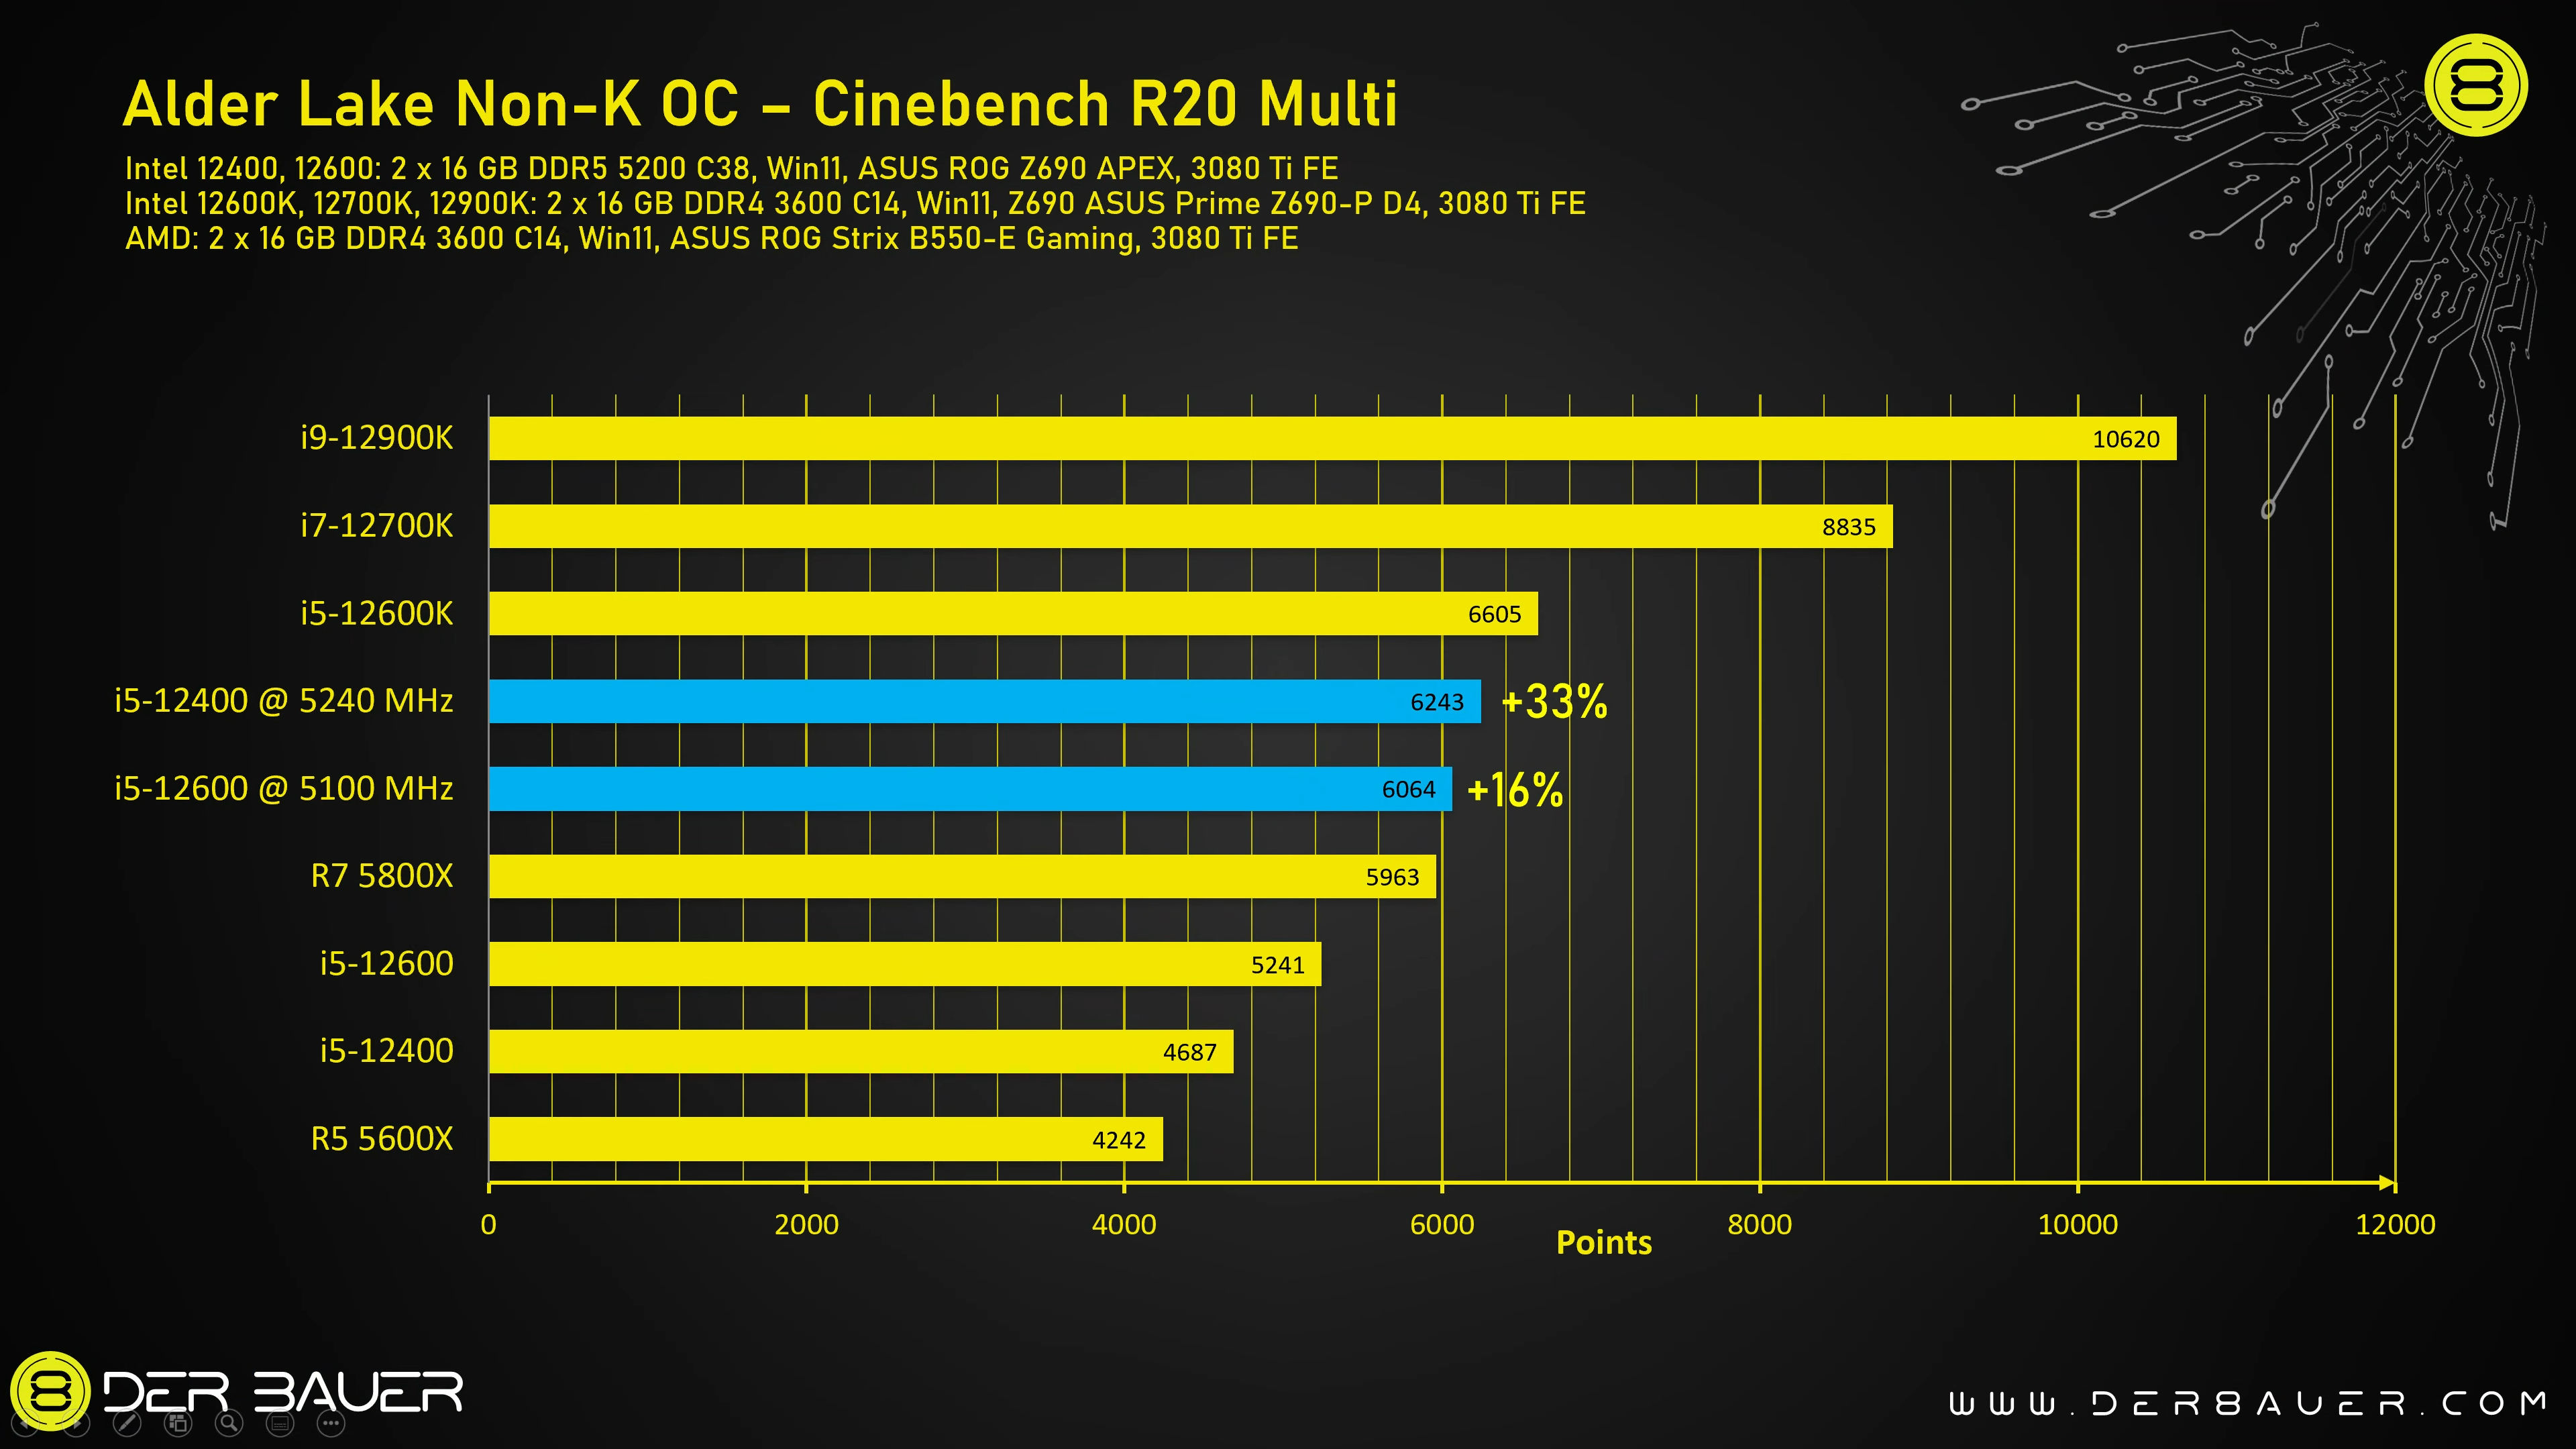 Intel Core i5-12400 non-K CPU gets overclocked to 5.2 GHz, 33